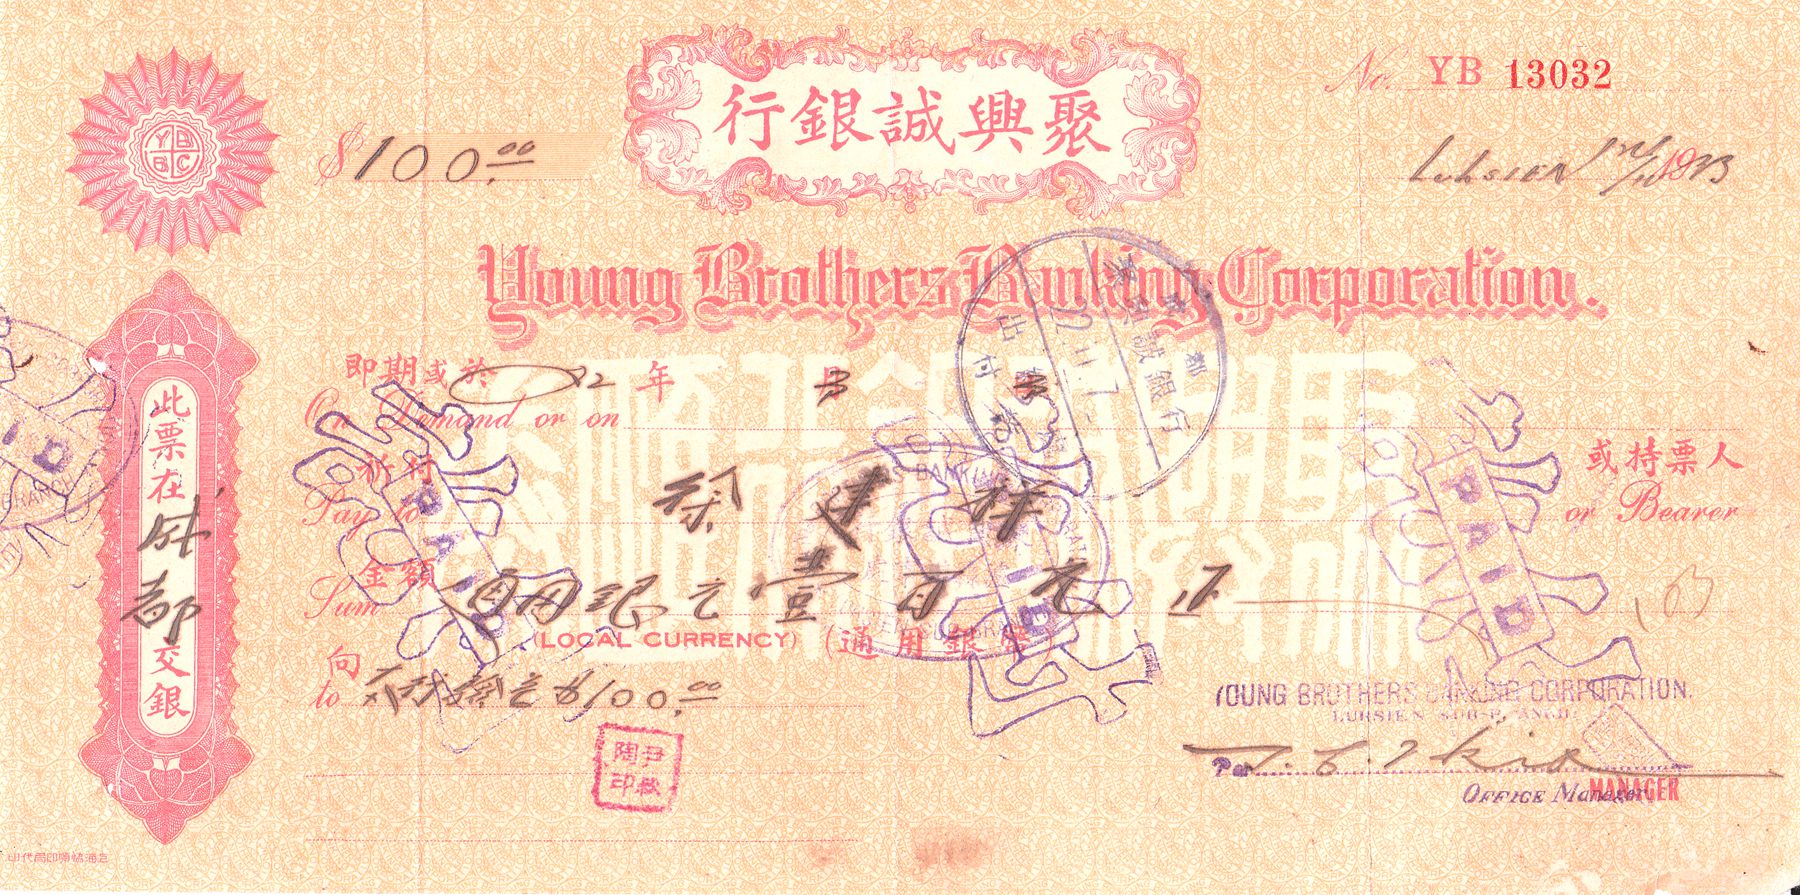 D2211, Check of Young Brothers Banking Corporation (Large), 1933 China